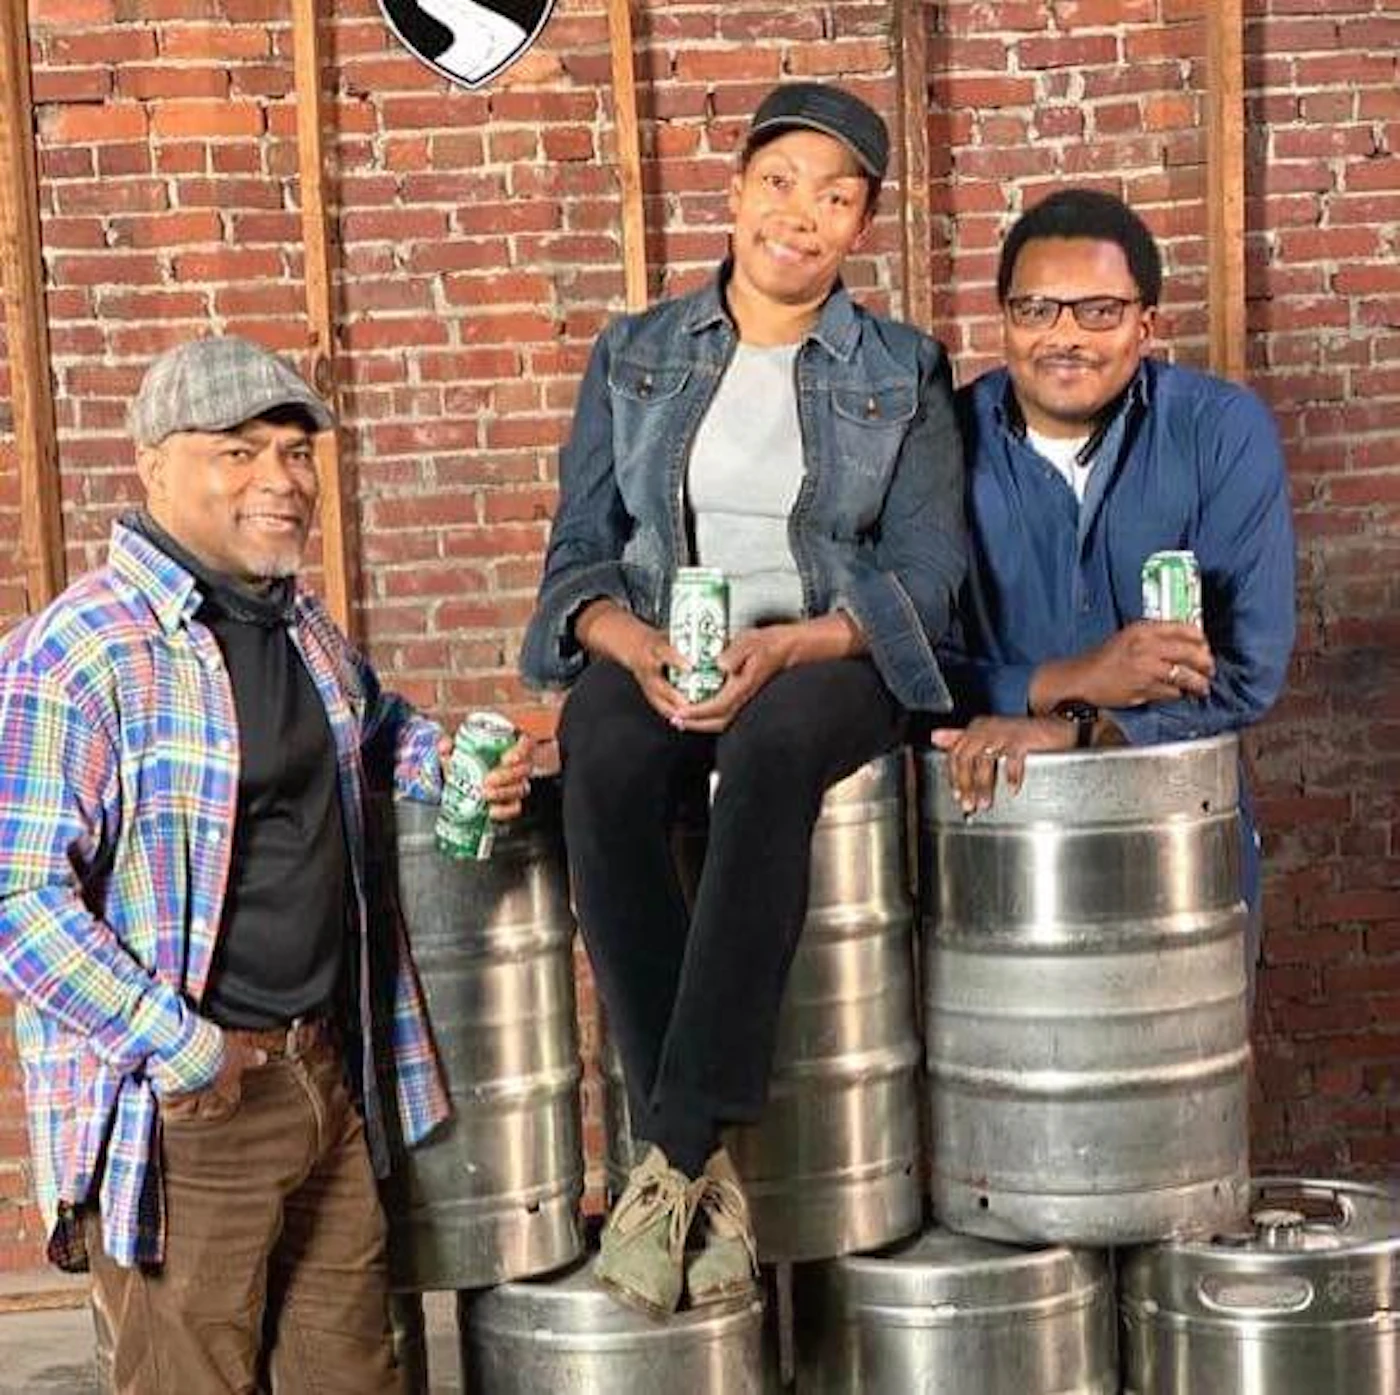 Carl (left) and Pernell Beatty (right) flank their sister Celeste, the owner of Harlem Brew South, in her taproom. The warehouse is the site of Operation Dixie, a historical and successful labor campaign in 1946. More than 10,000 tobacco workers, mostly women, gathered from around the state and voted to unionize for better working conditions. Harlem Brew's lager is named '1946' in tribute.